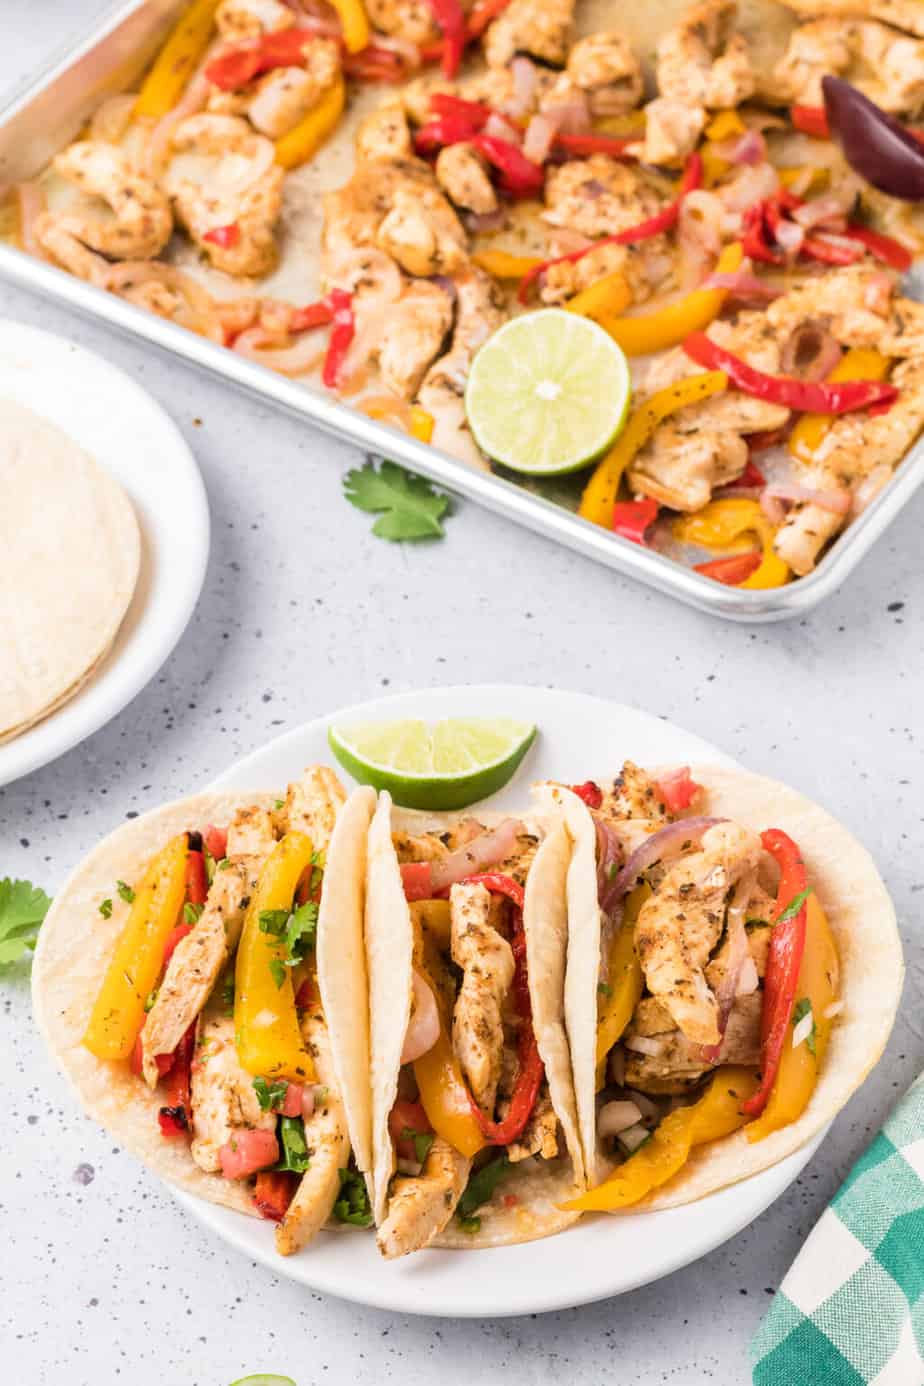 Three chicken fajitas with colorful bell peppers and onions in soft tortillas, garnished with lime wedges and cilantro, alongside a tray of ingredients—perfect for busy families.